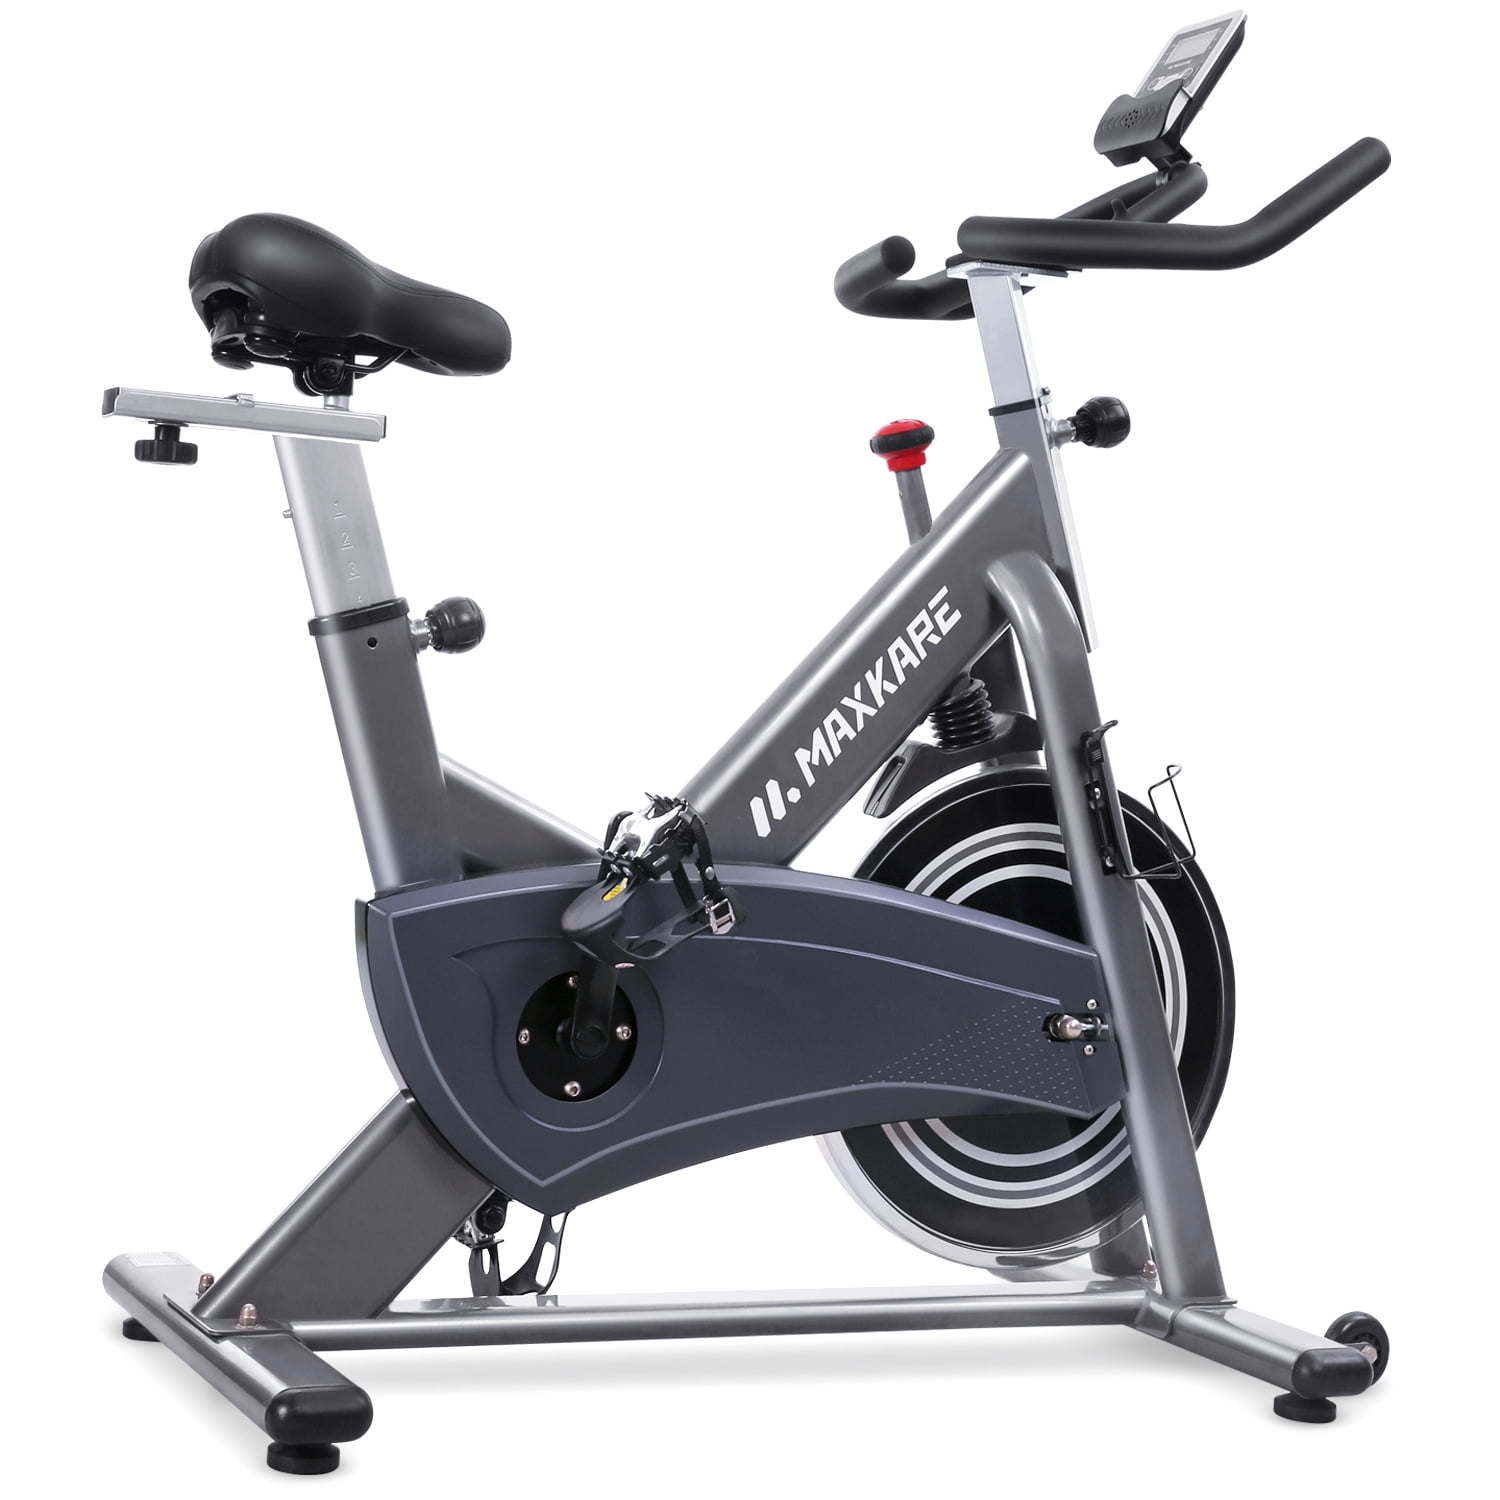 MaxKare Magnetic Exercise Bike,Belt Drive Spin Bike,Stationary Indoor Cycling Bike with High Weight Capacity Adjustable Magnetic Resistance w/Tablet Holder Gray 